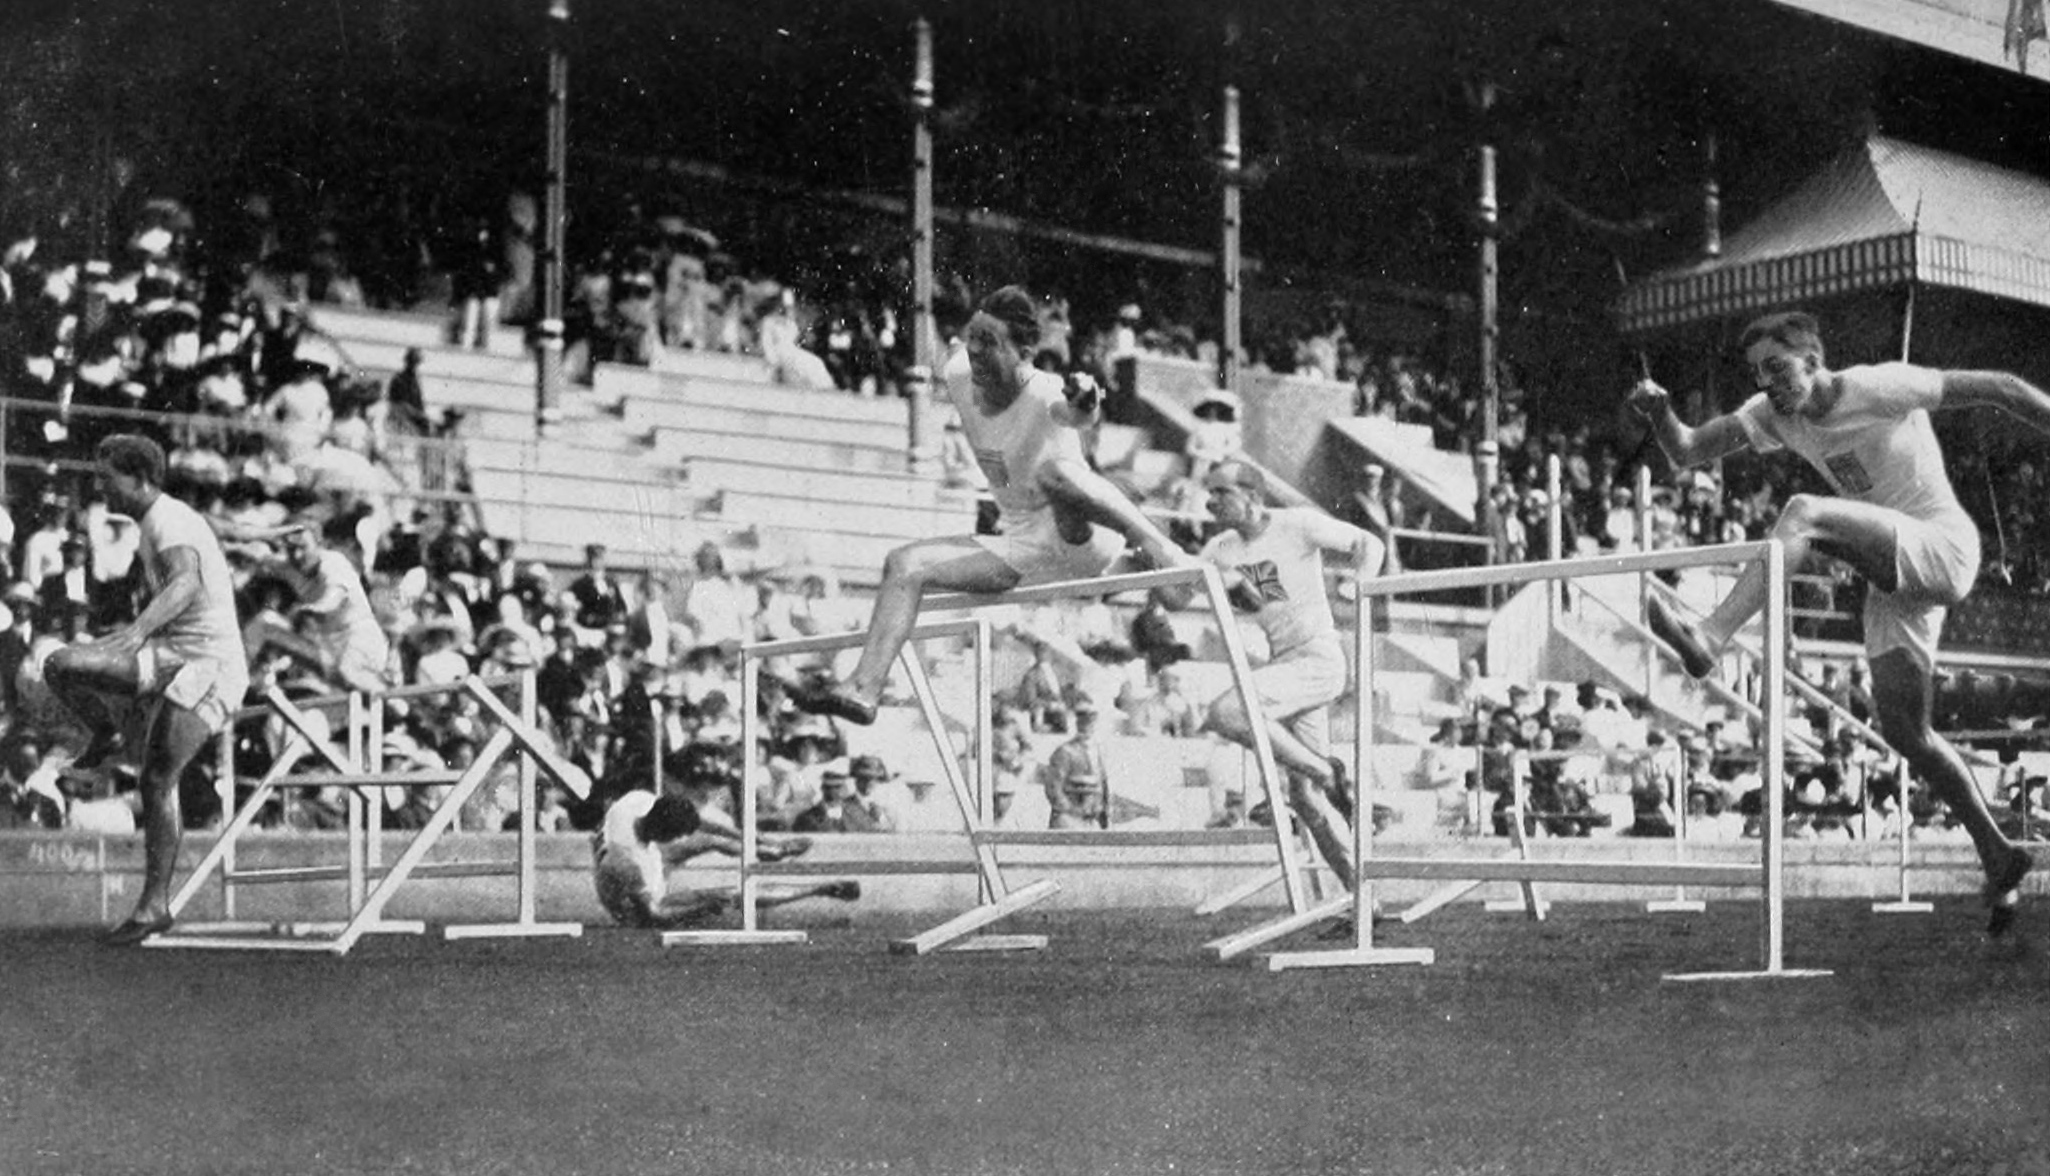 The final of the men's 110 metre hurdles at the 1912 Summer Olympics.